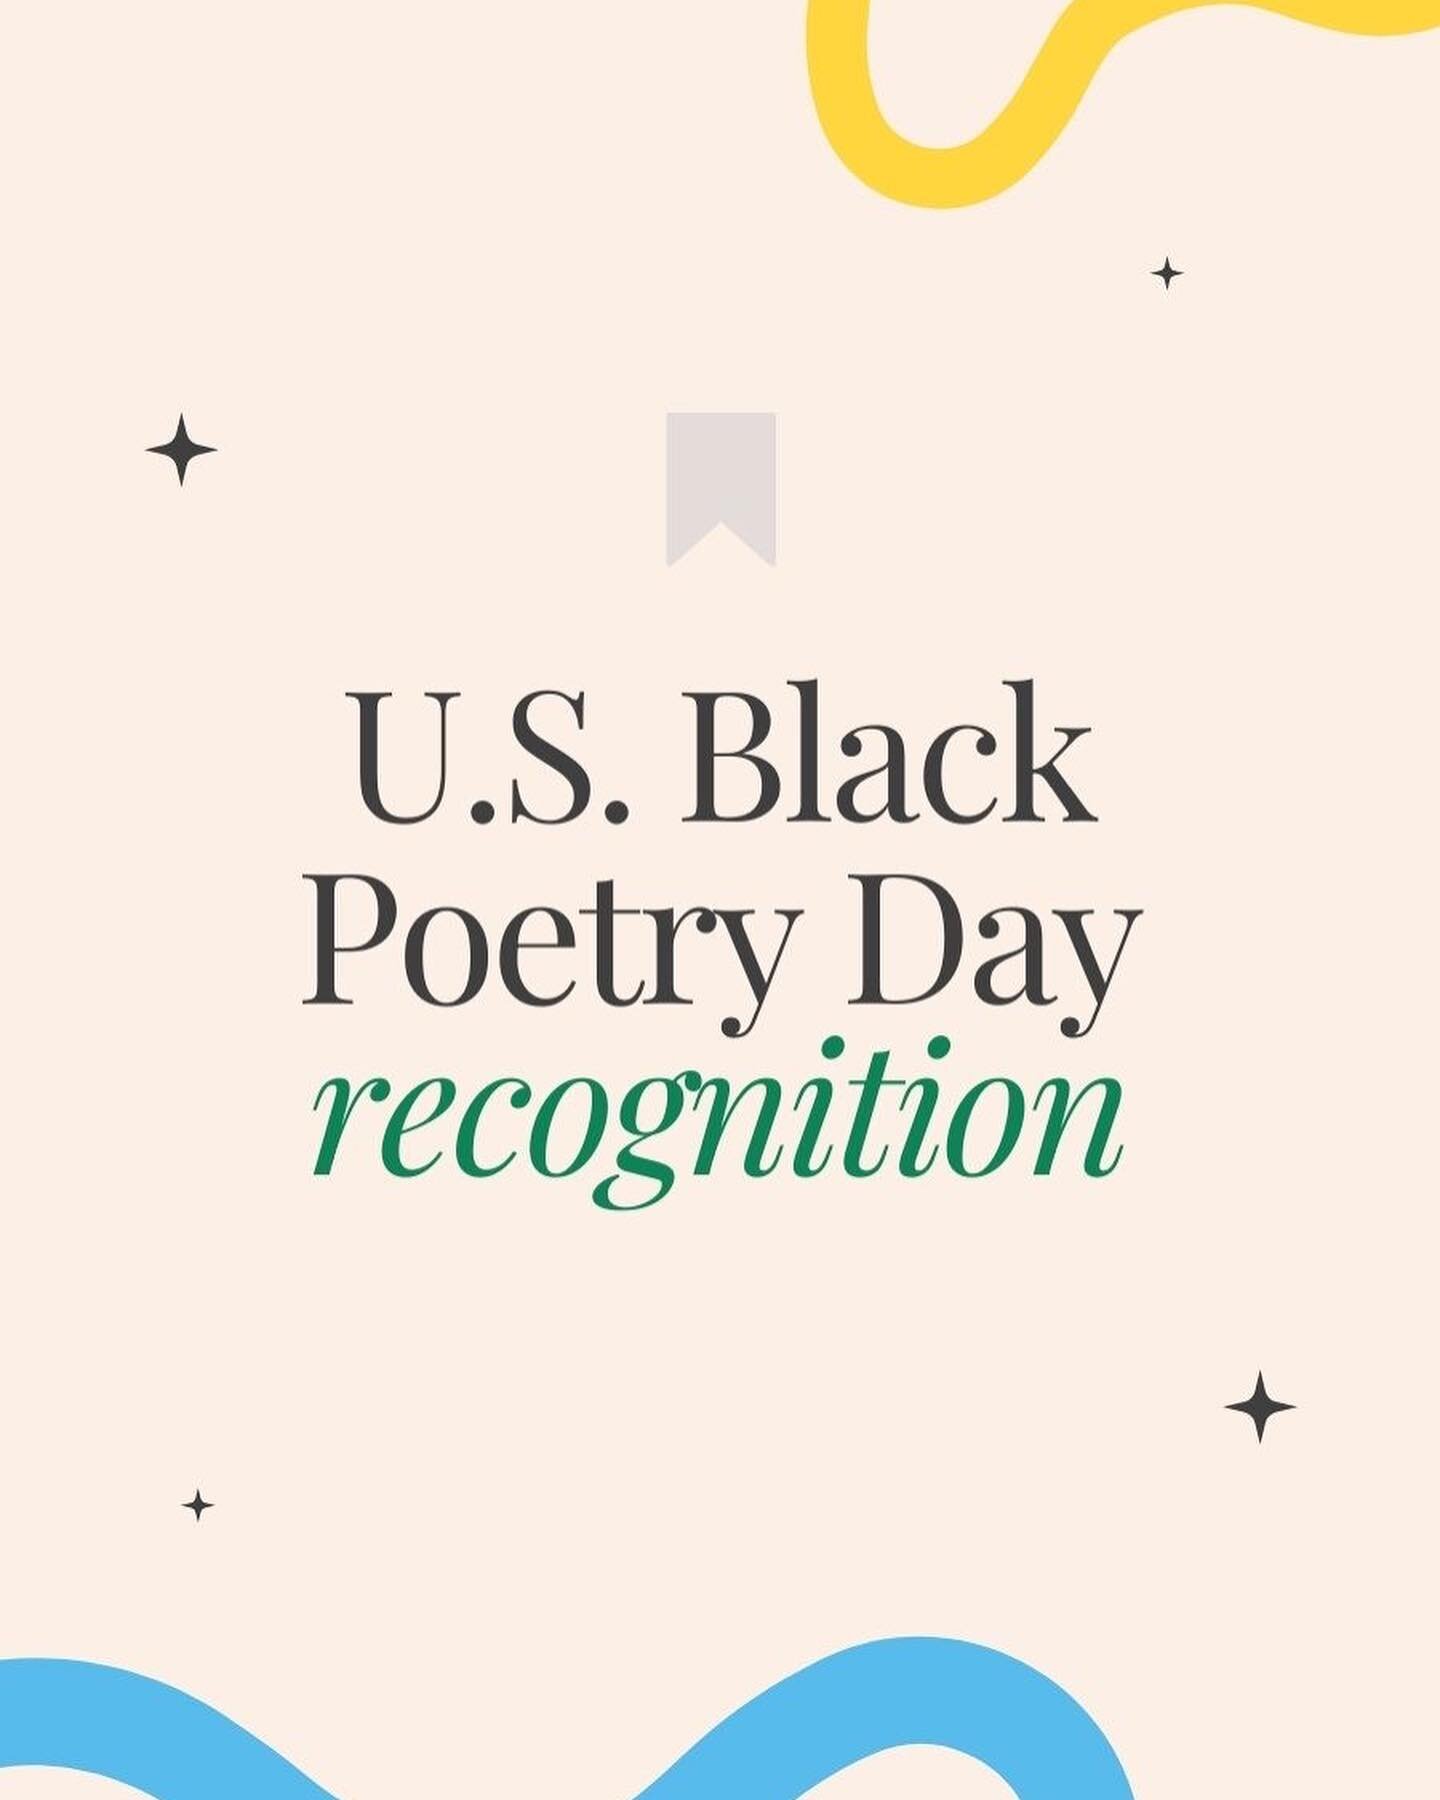 Today on Black Poetry Day, we celebrate the depth, resilience, and beauty of Black poets and authors. Their words have not only shaped literature but also provided insight into histories, dreams, and the human experience. ✨

A special acknowledgment 